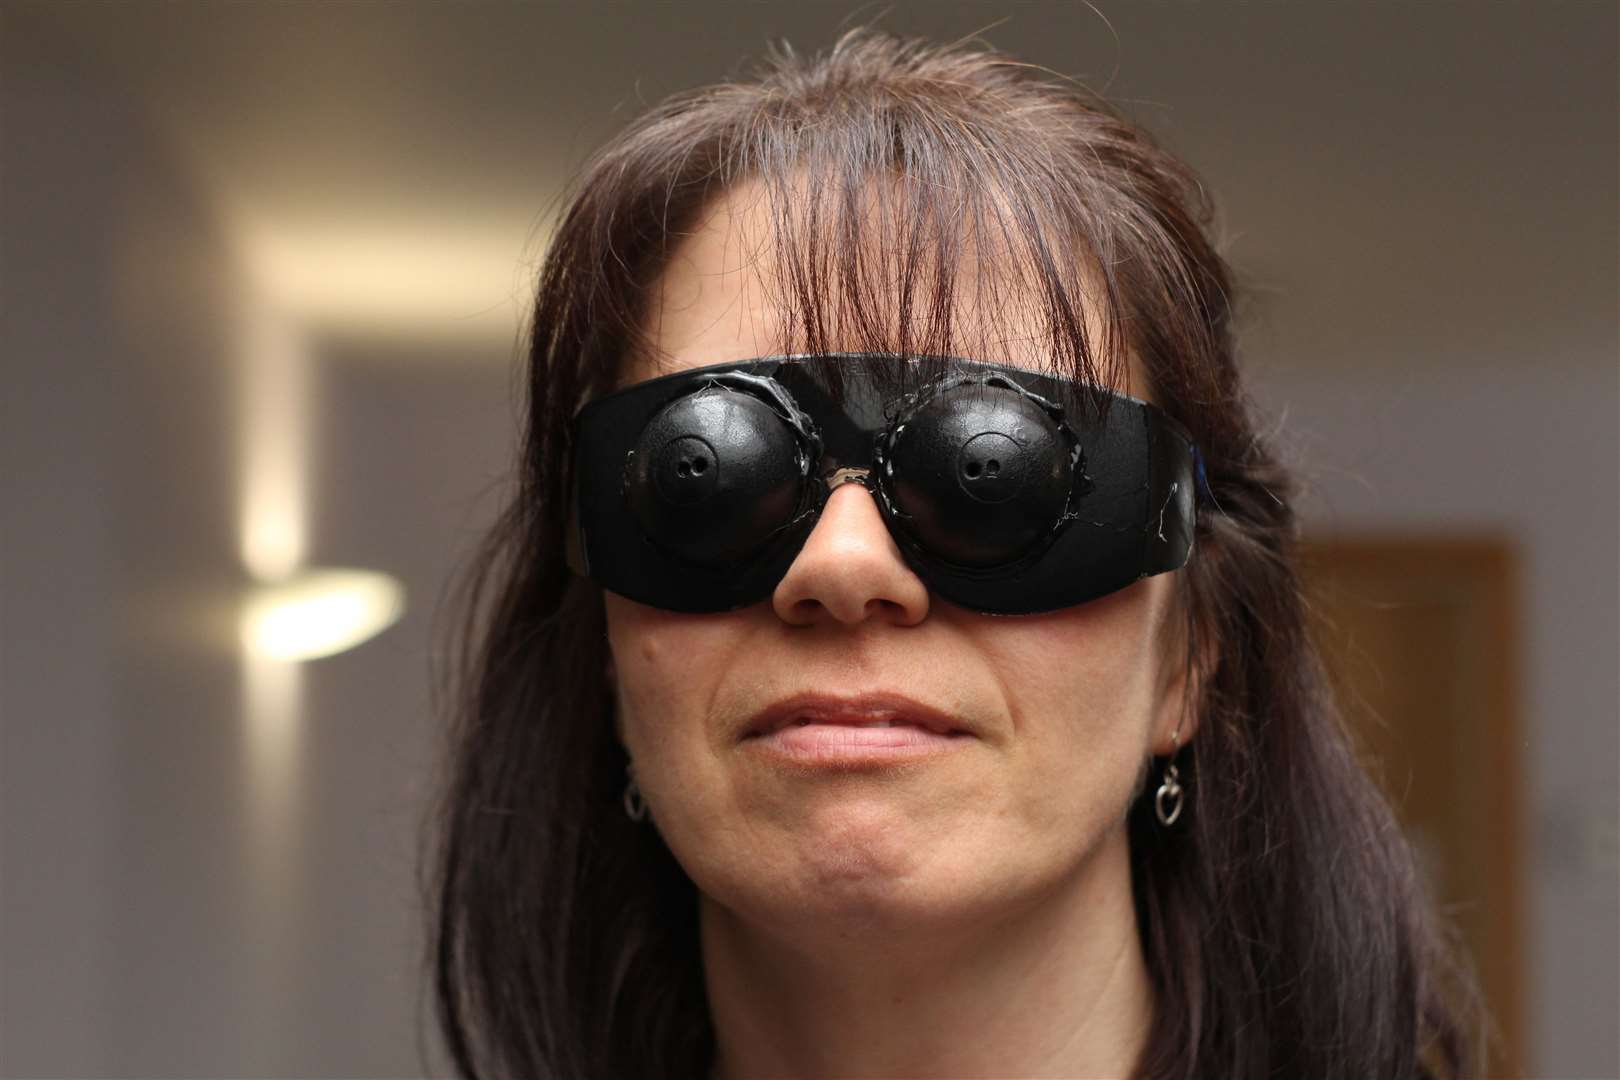 Pauline Gibson, sensory support worker at Hearing and Sight Care, wearing simulation specs showing how a person’s sight is limited by retinitis pigmentosa, leading to tunnel vision. This was at a Caithness Health and Wellbeing Market in Wick in 2019.